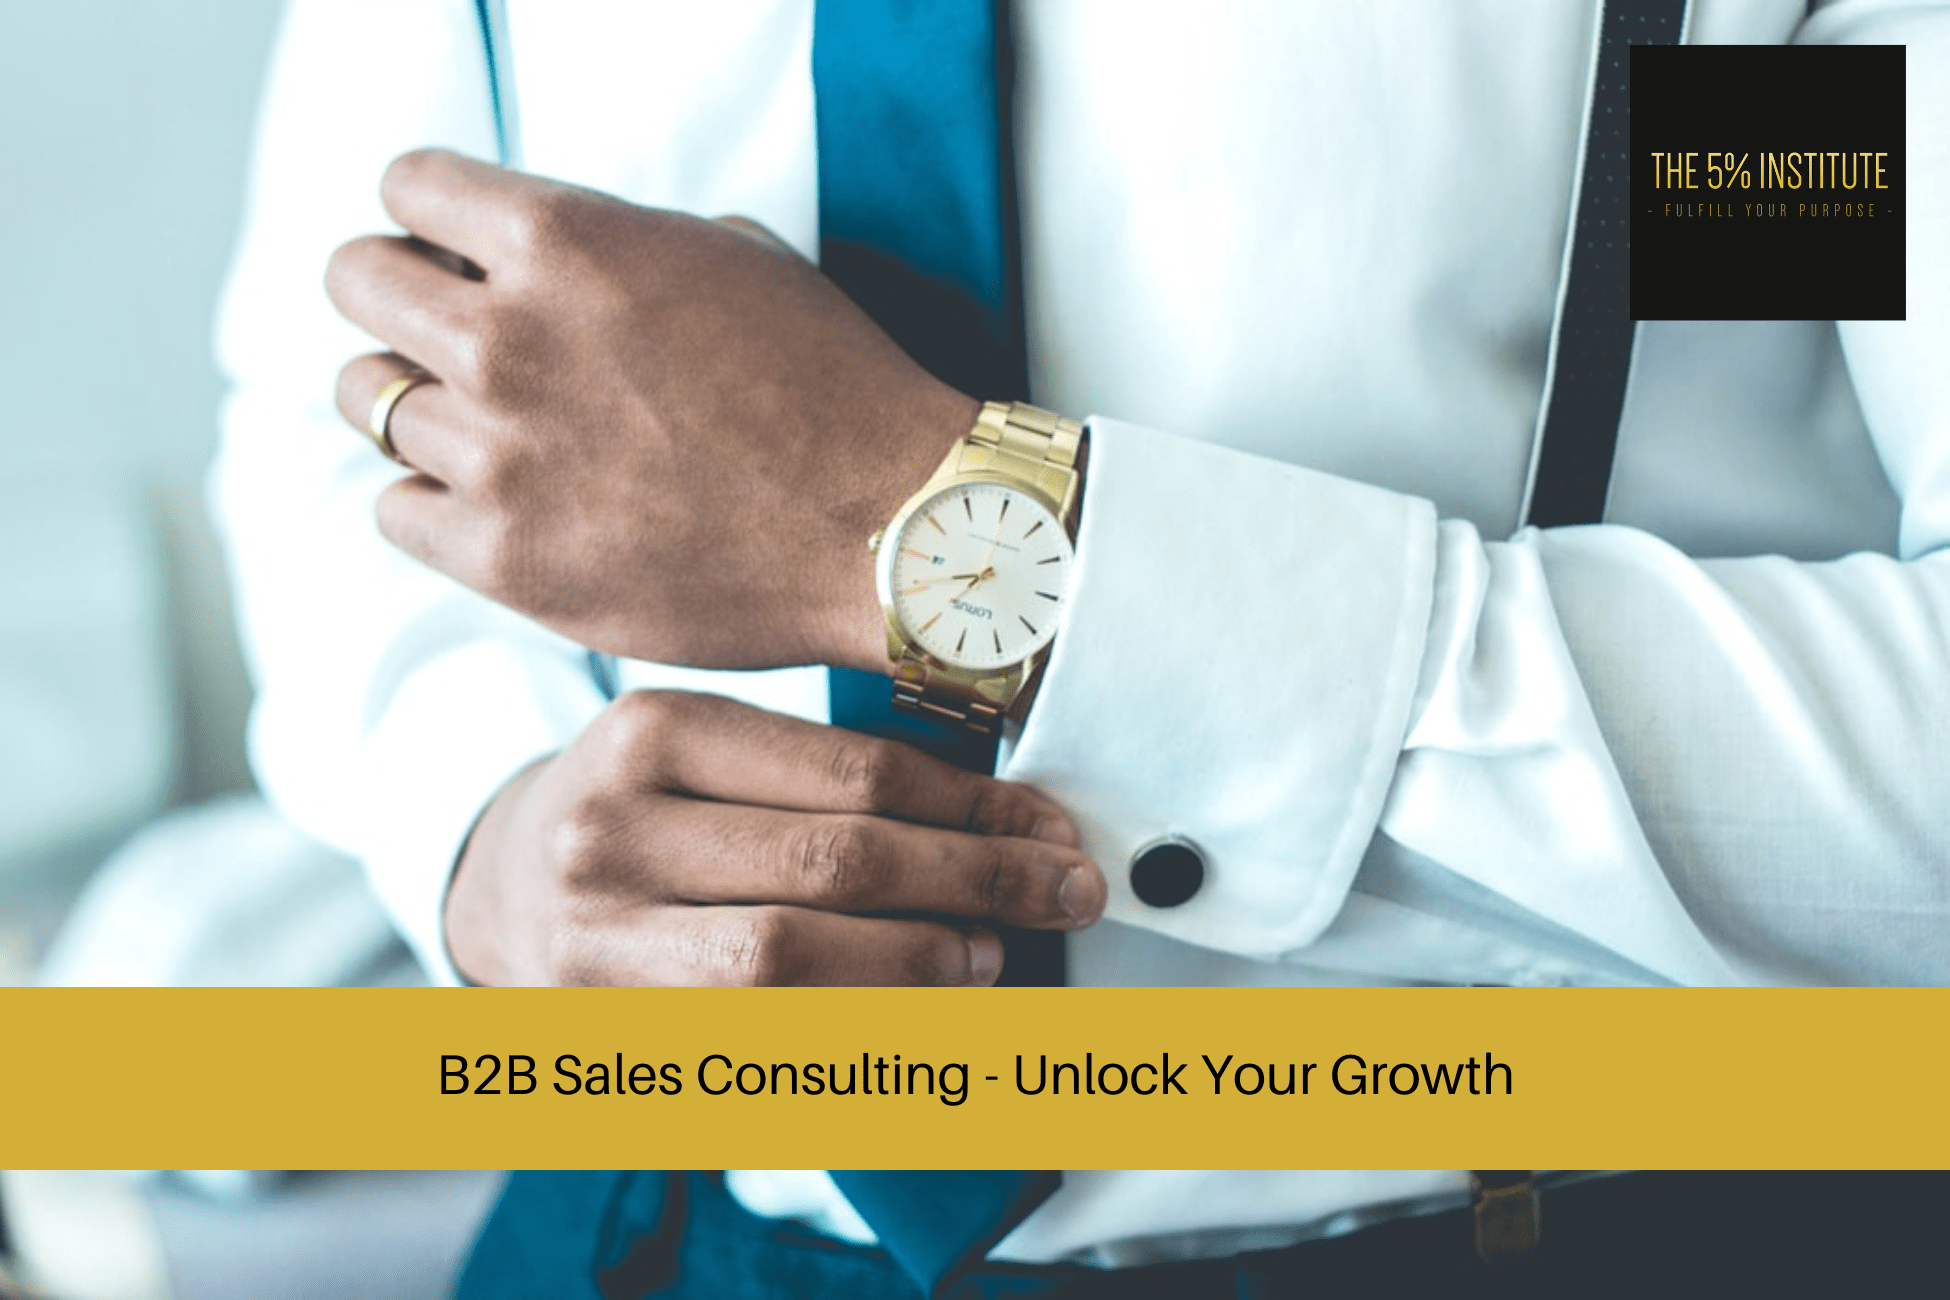 B2B Sales Consulting - Unlock Your Growth